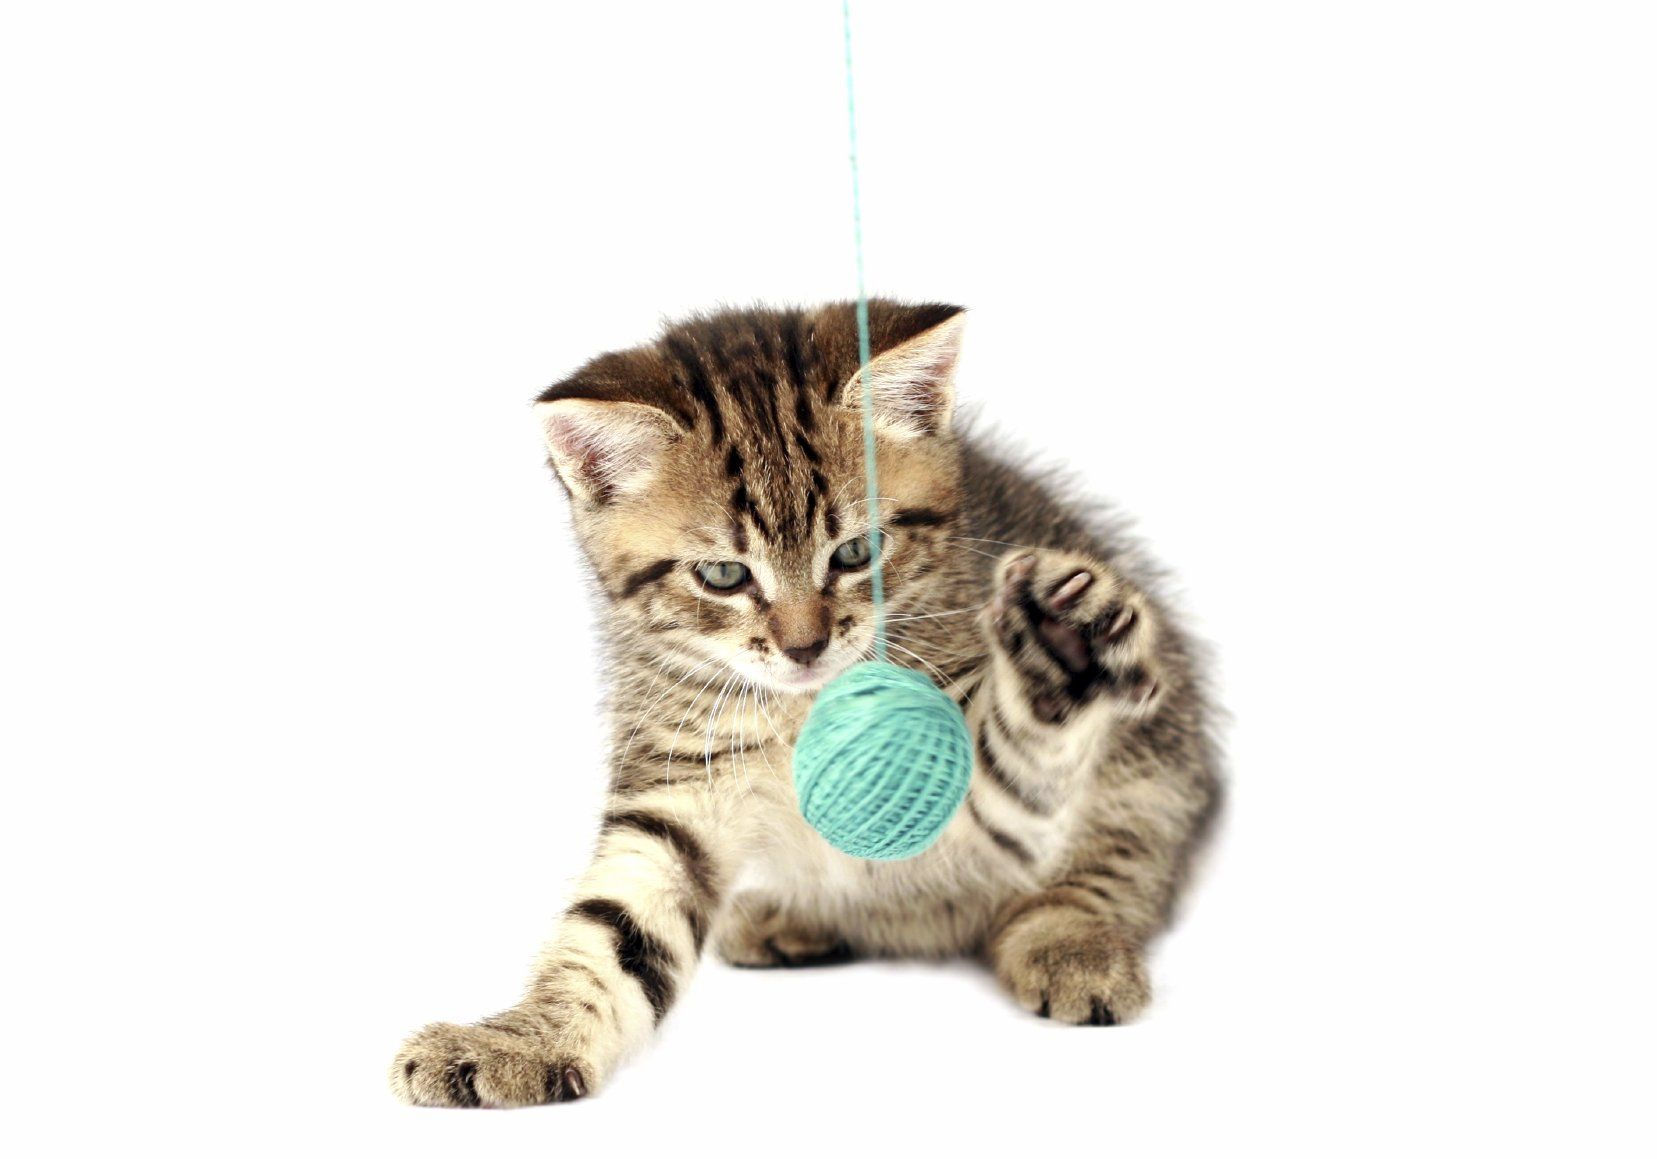 A curious, striped  kitten playing with a ball of blue twine